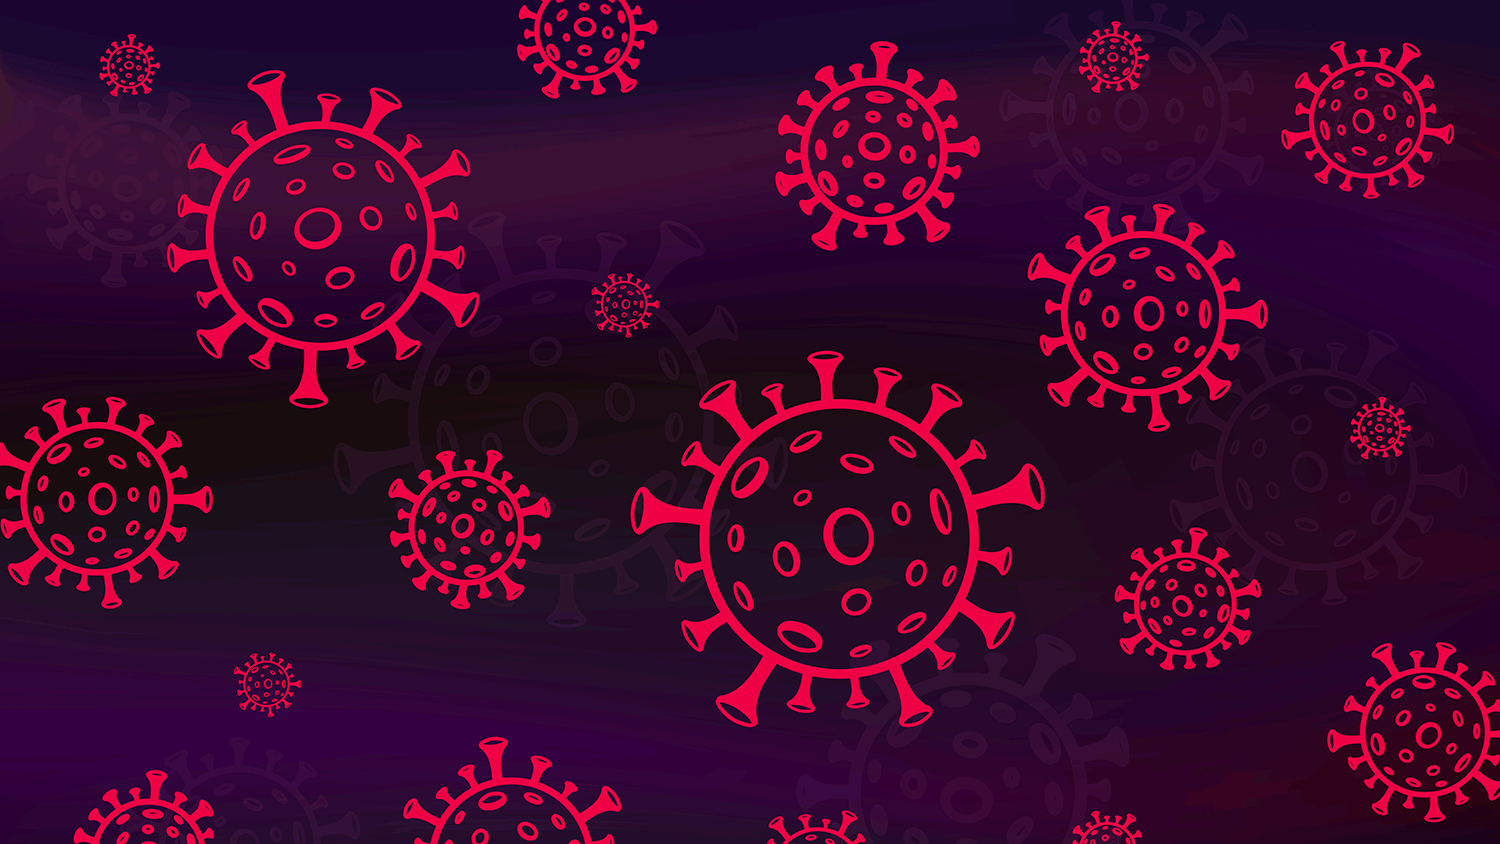 Cartoon images of the covid virus.